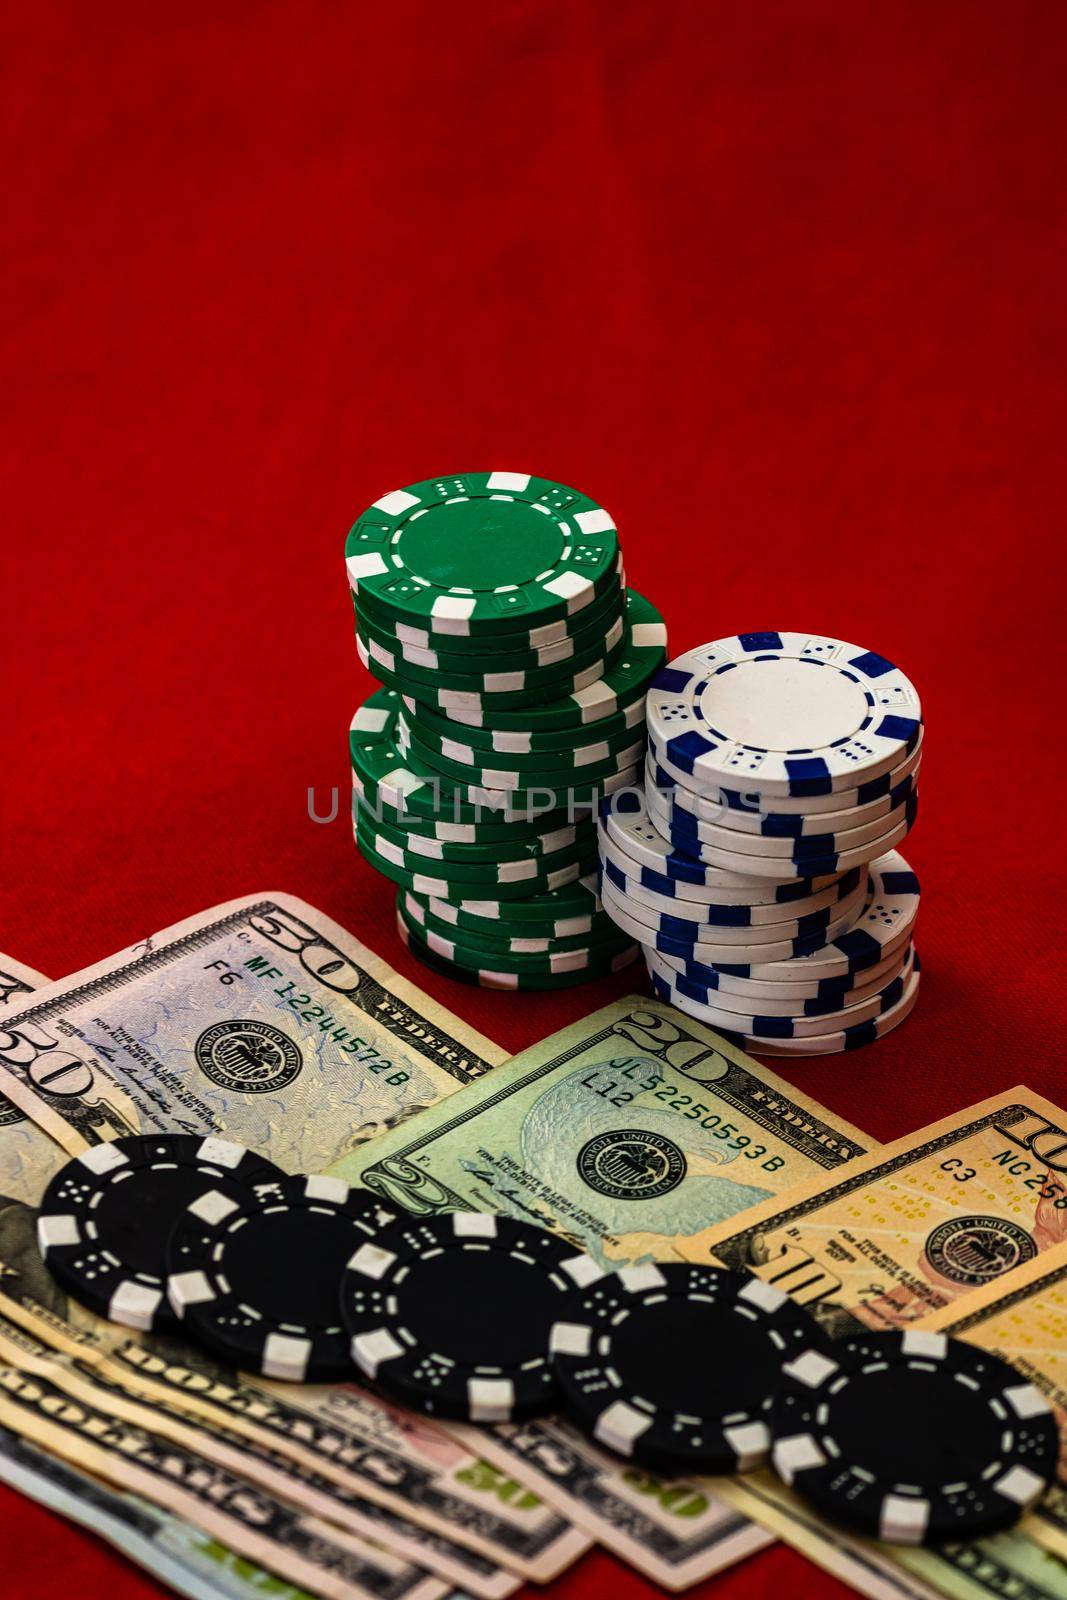 Stacks of poker chips with money on red background, USD currency